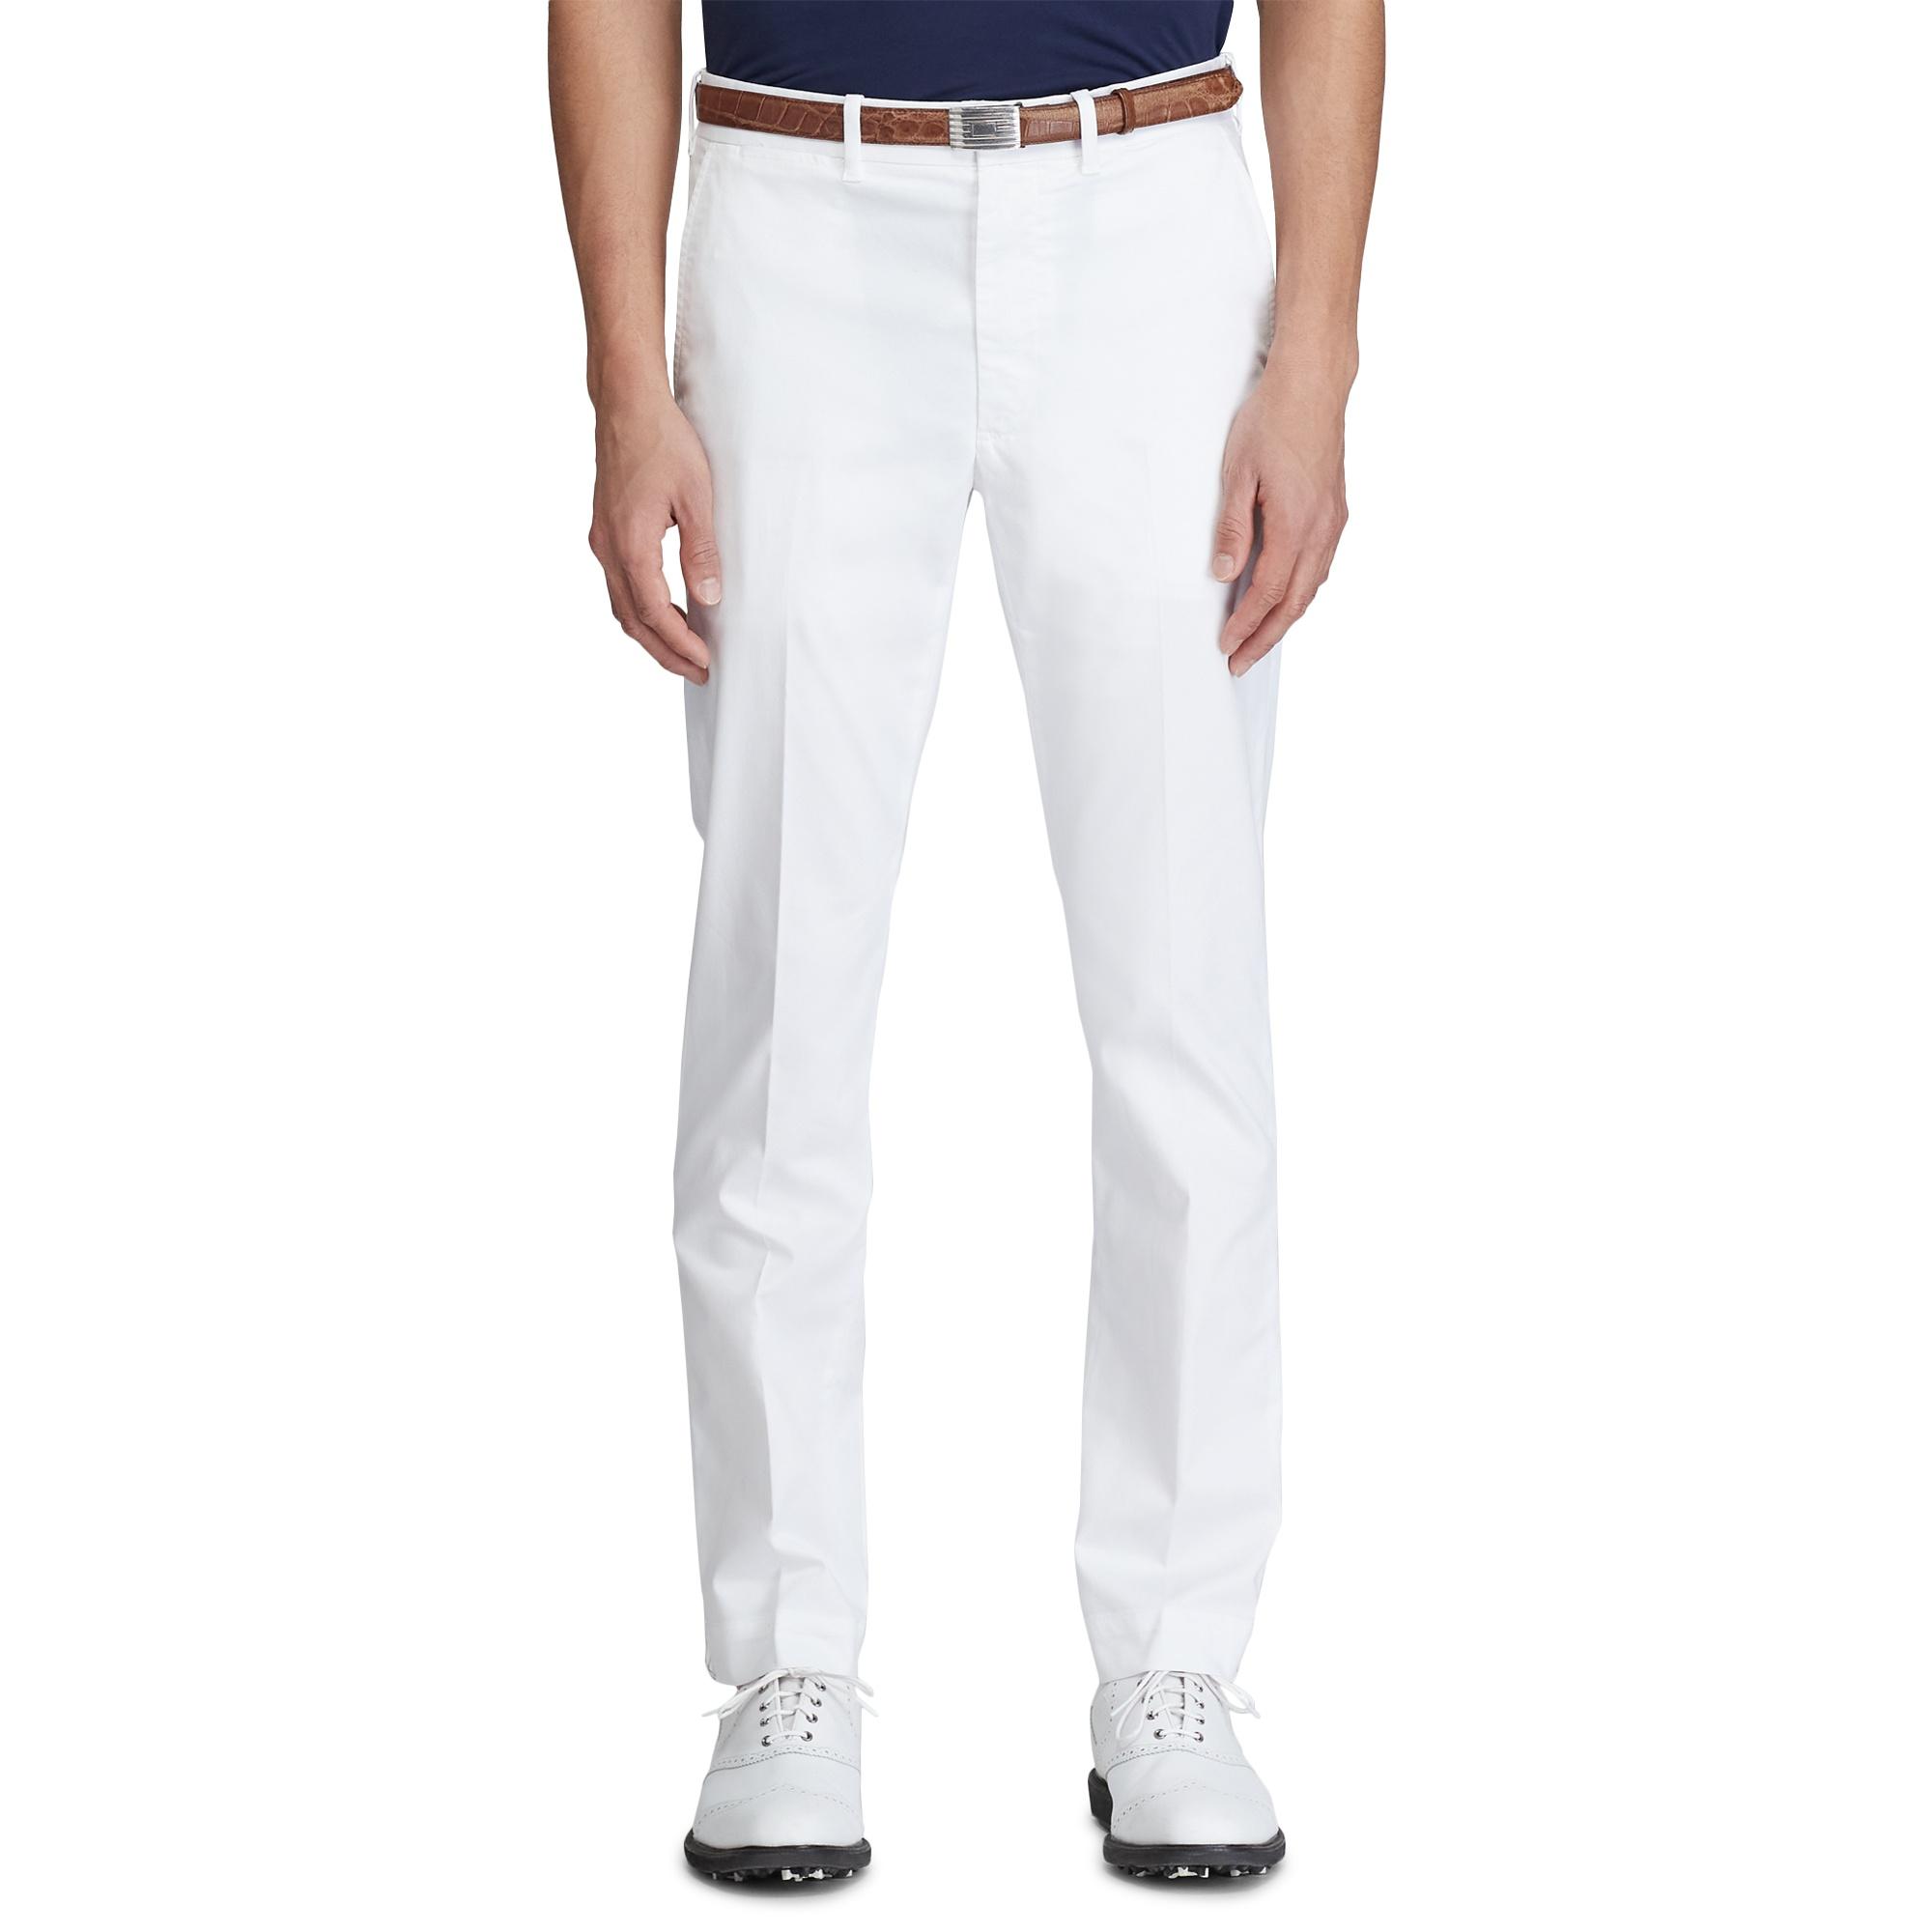 Ralph Lauren Cotton Slim Fit Stretch Chino Pant in White for Men - Lyst